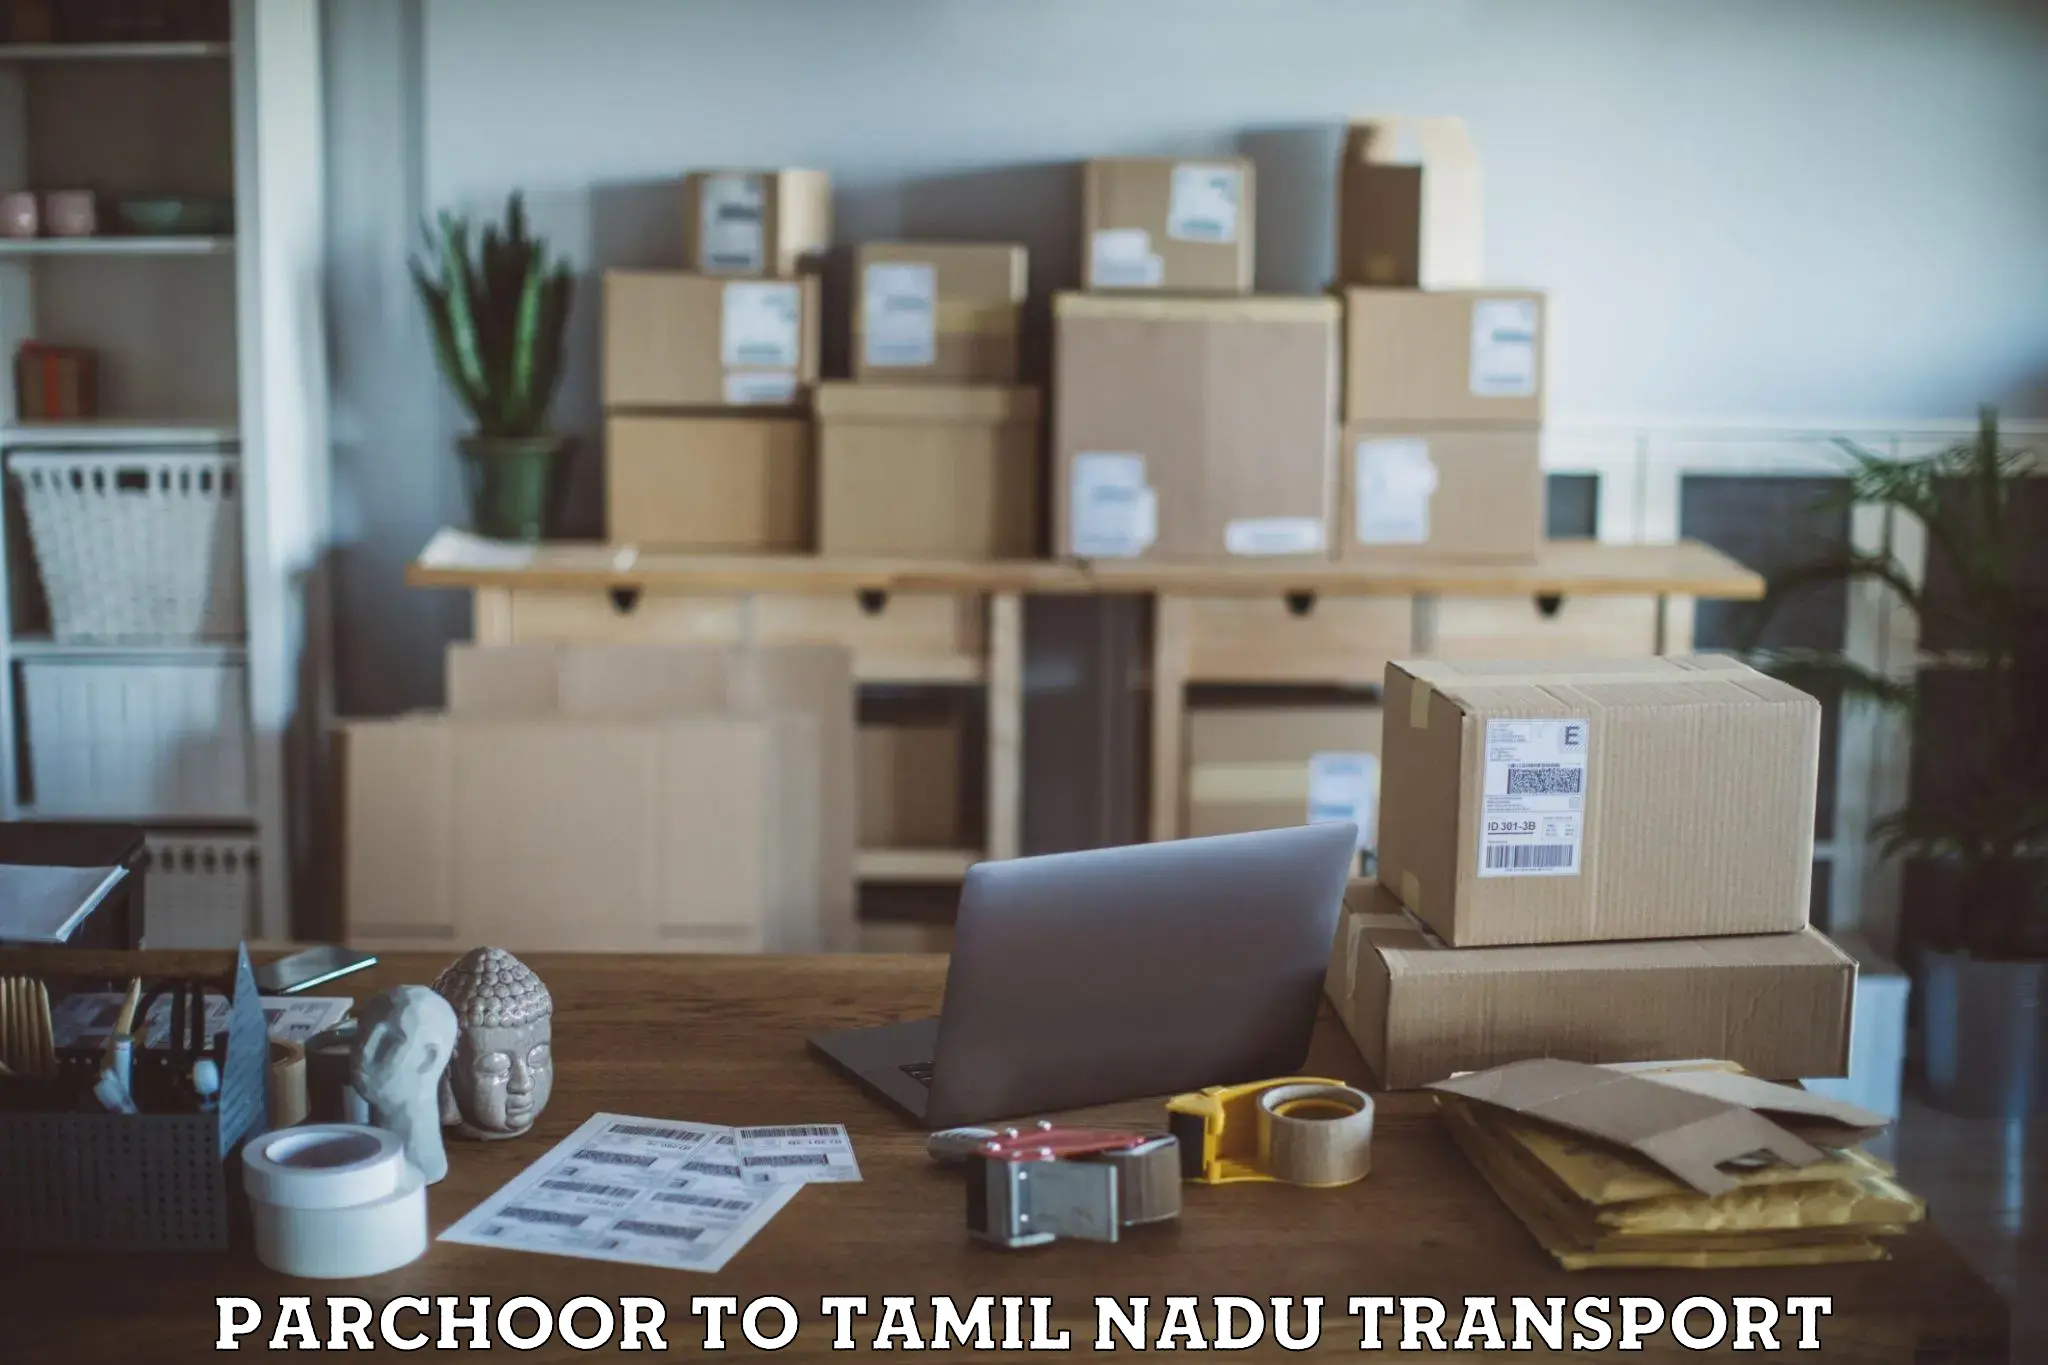 Package delivery services Parchoor to Chennai